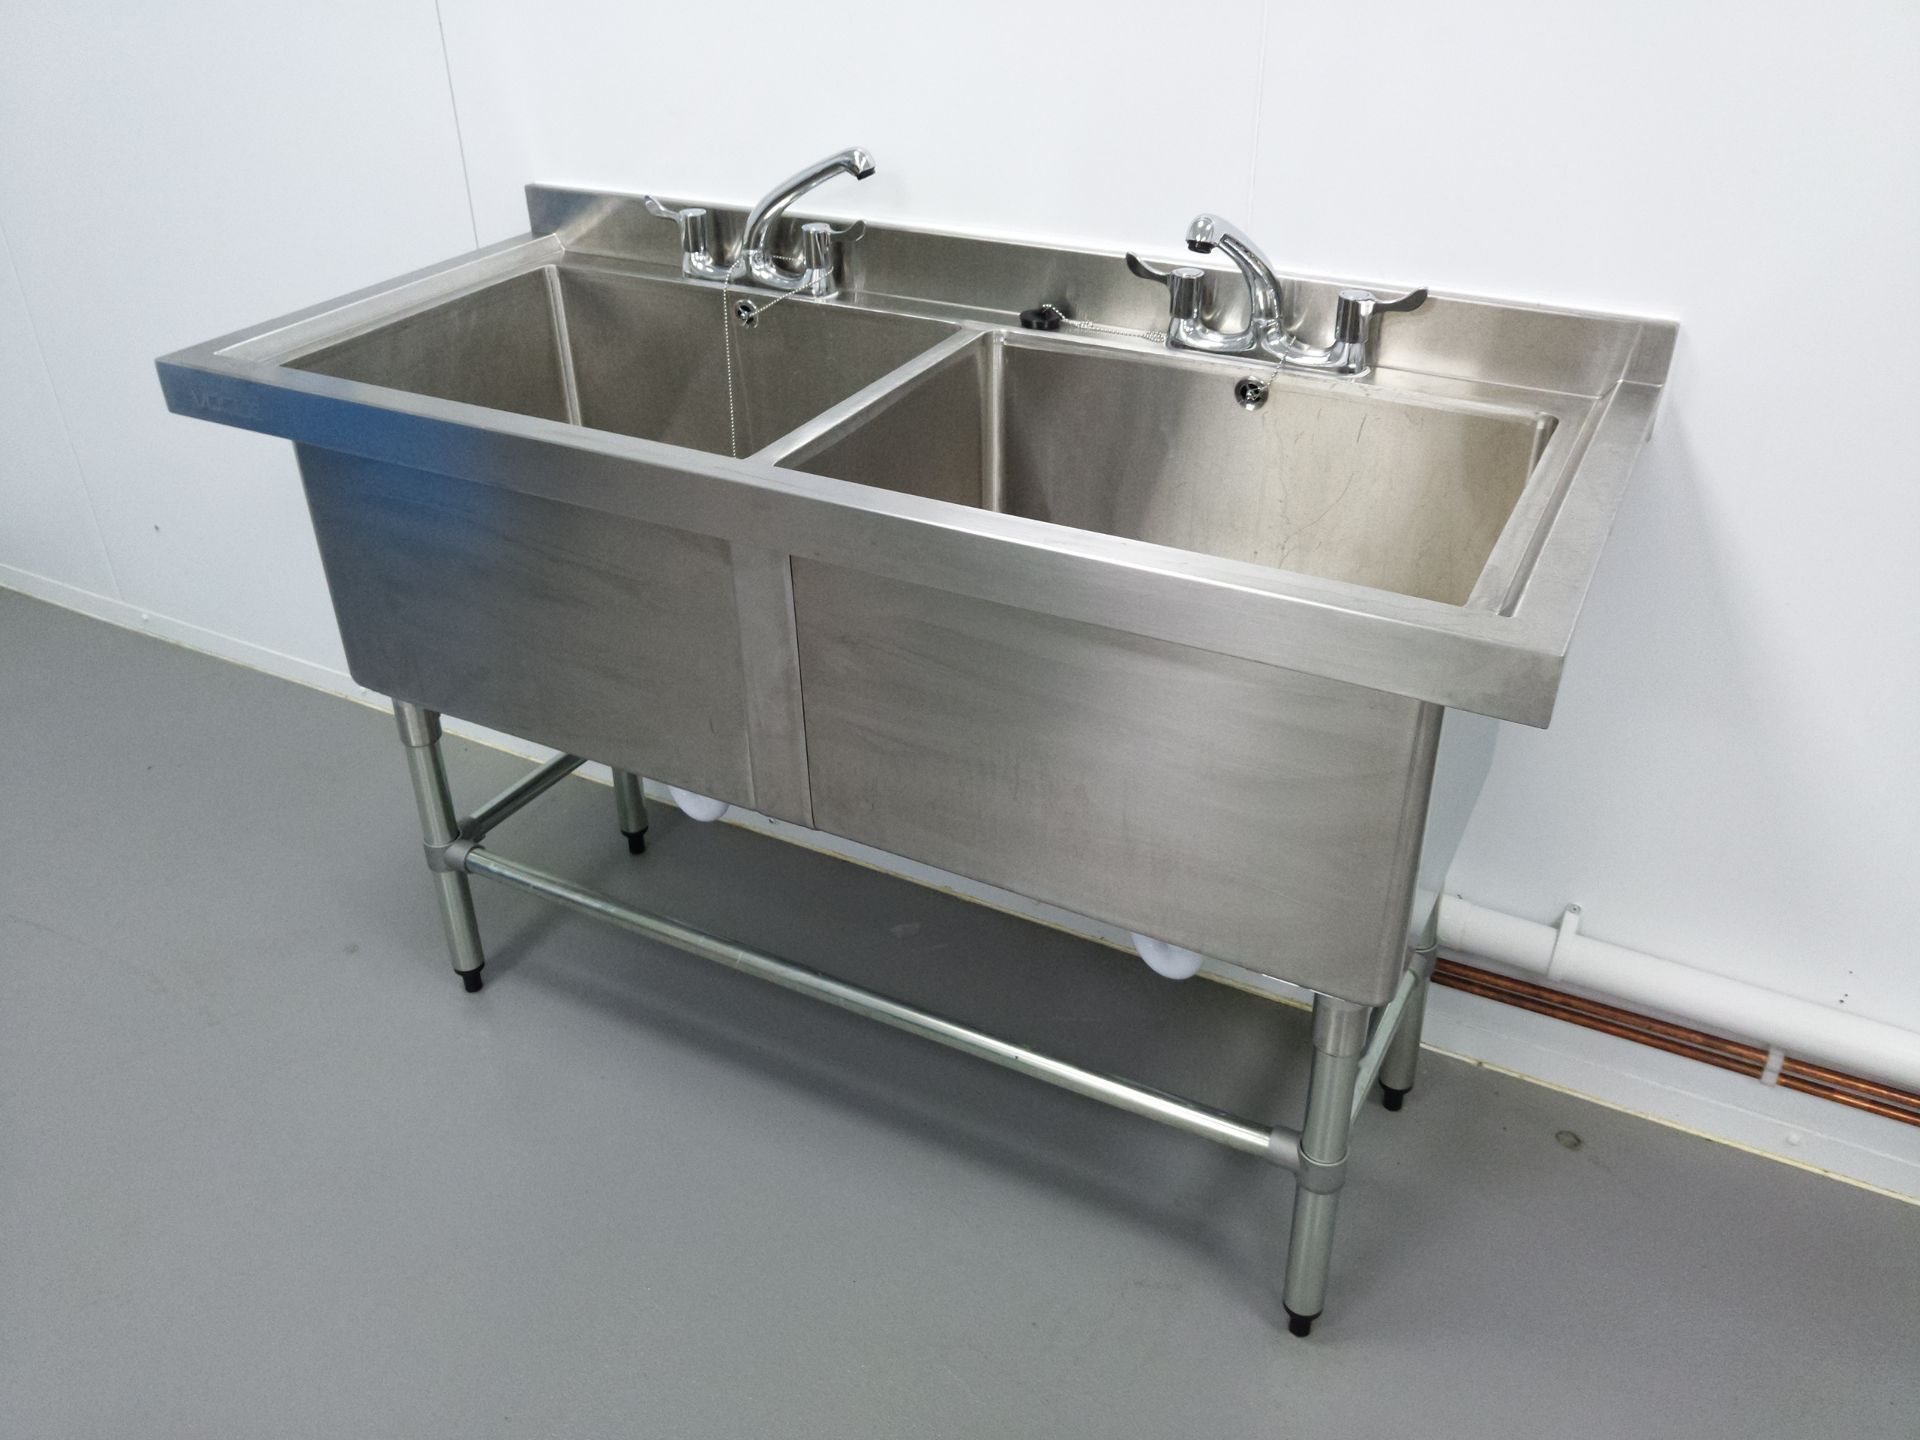 Vogue Stainless Steel Double Deep Pot Sink with Taps - Image 2 of 2